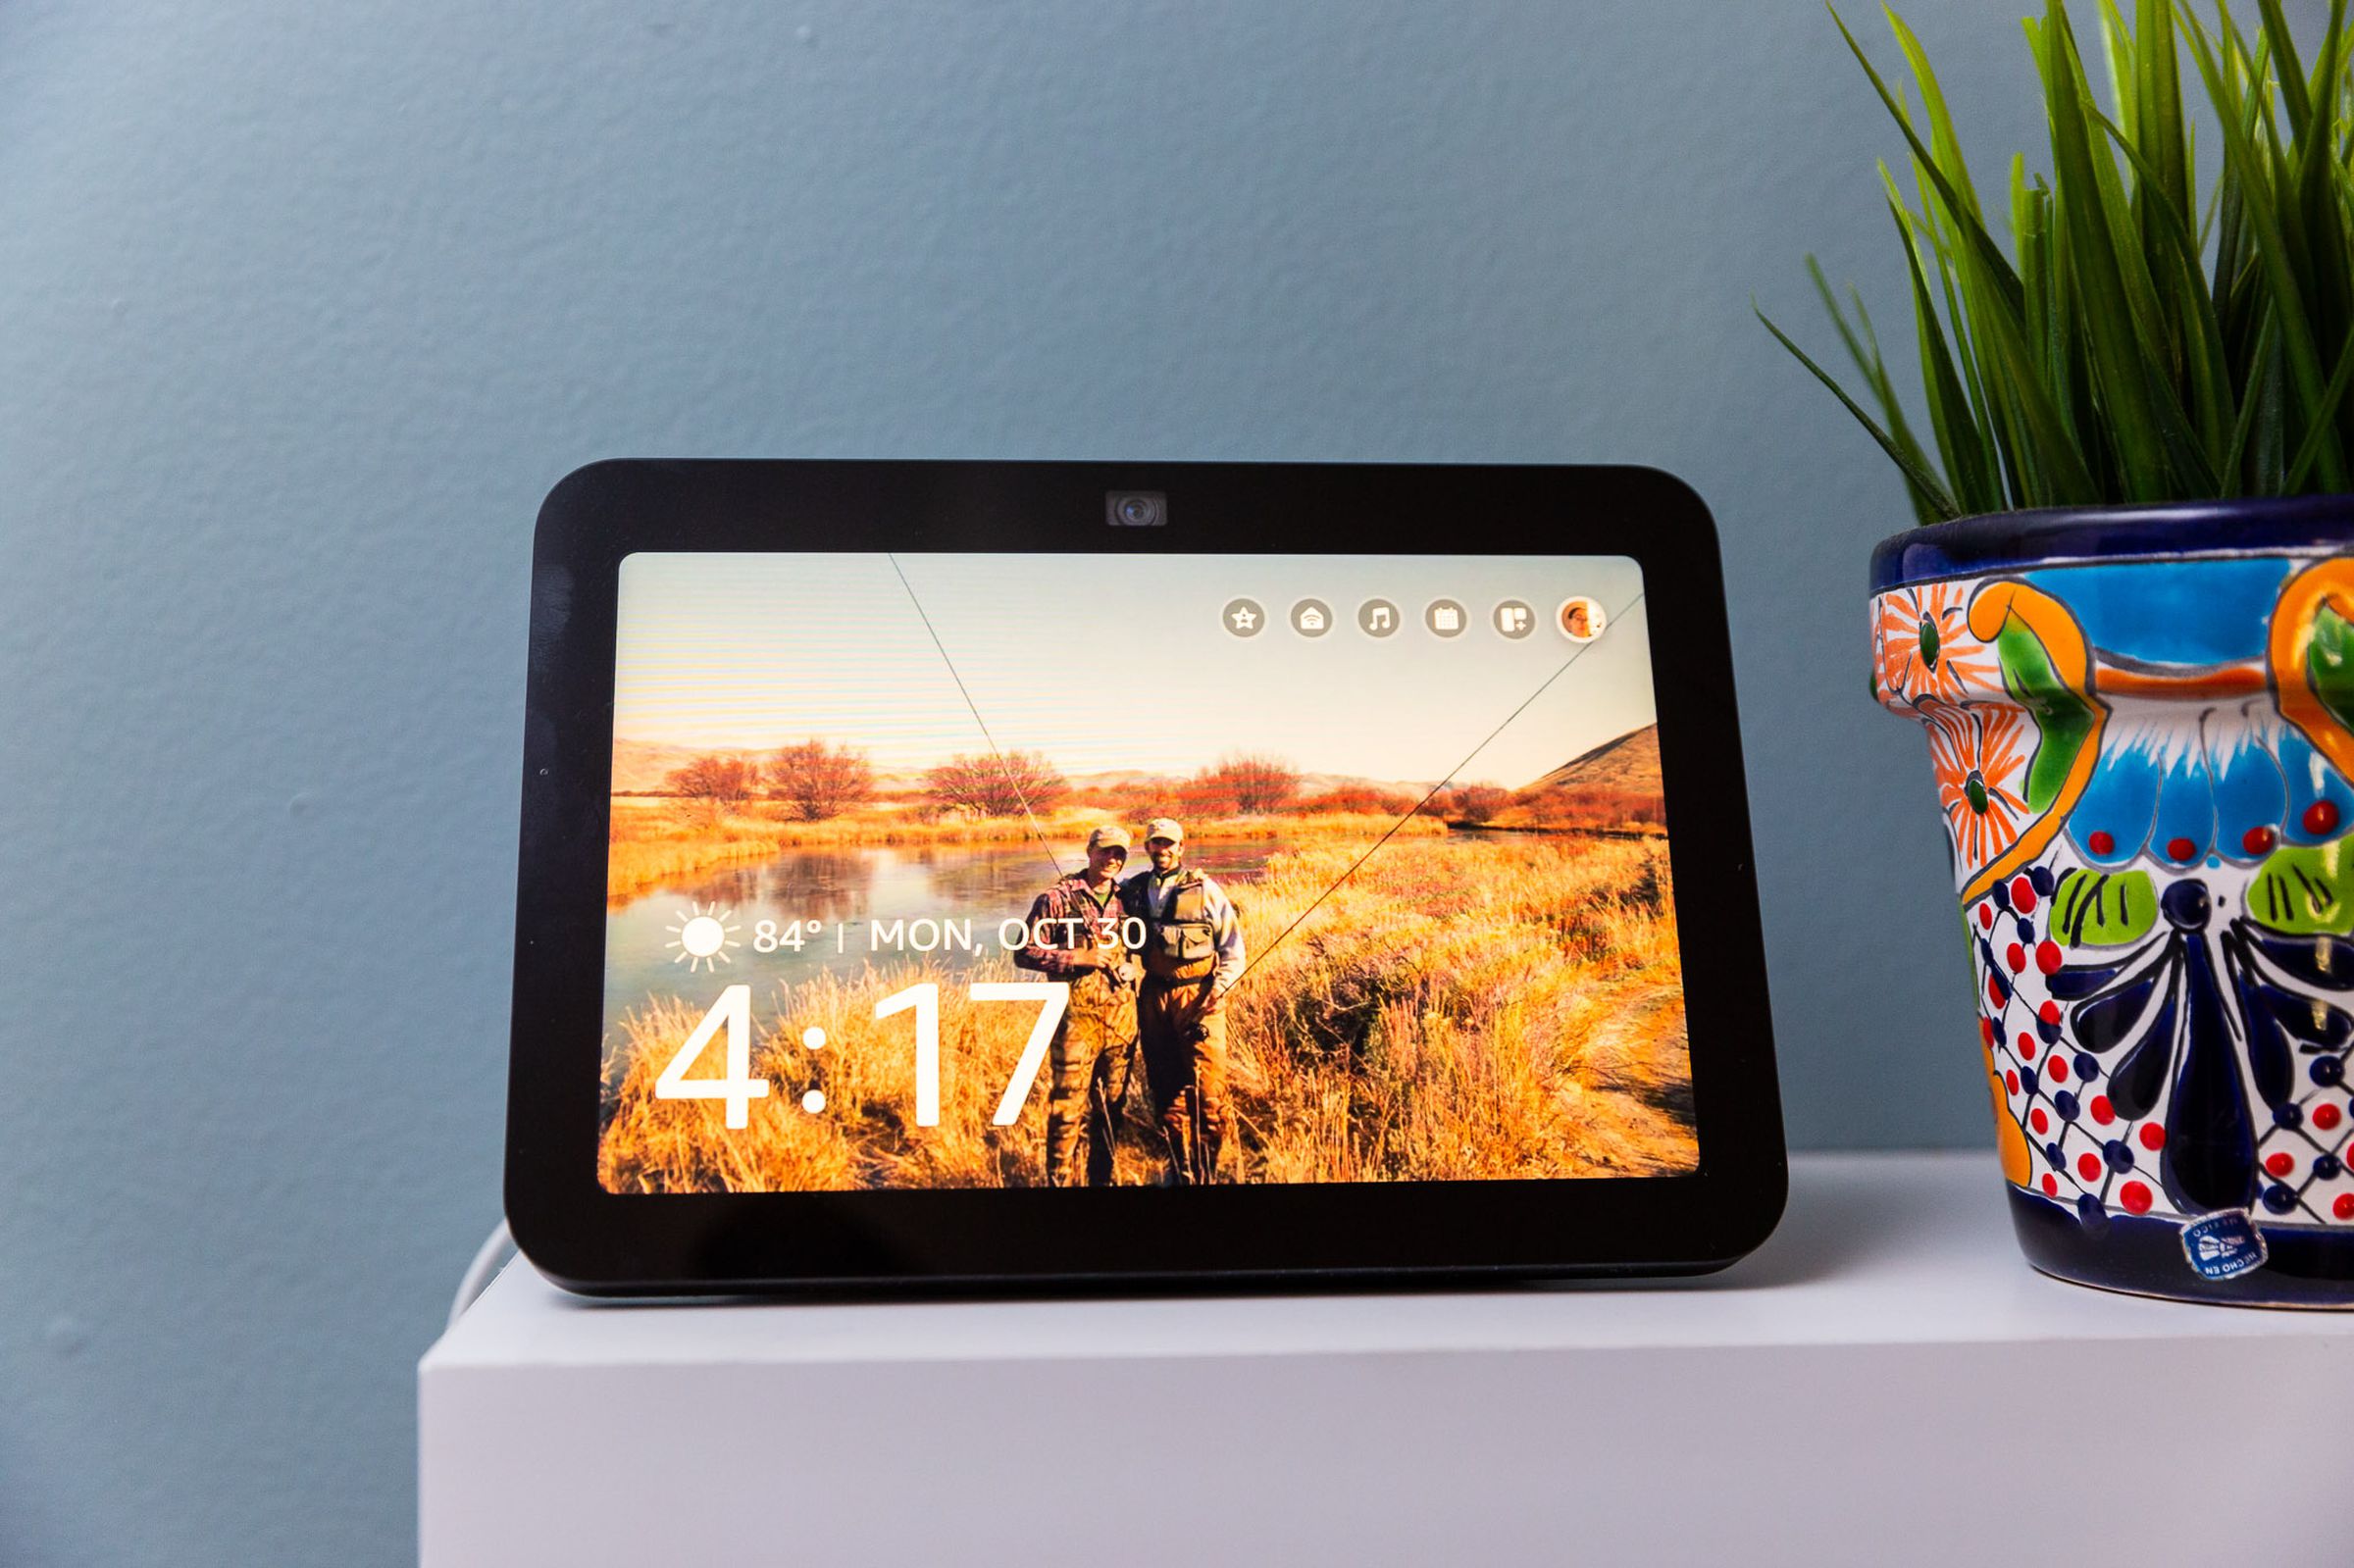 <em>The Echo Show 8 third-gen has a new edge-to-edge glass screen, the camera is now in the middle, not on the right side, and you see widgets in the top right when you’re close to the device.</em>